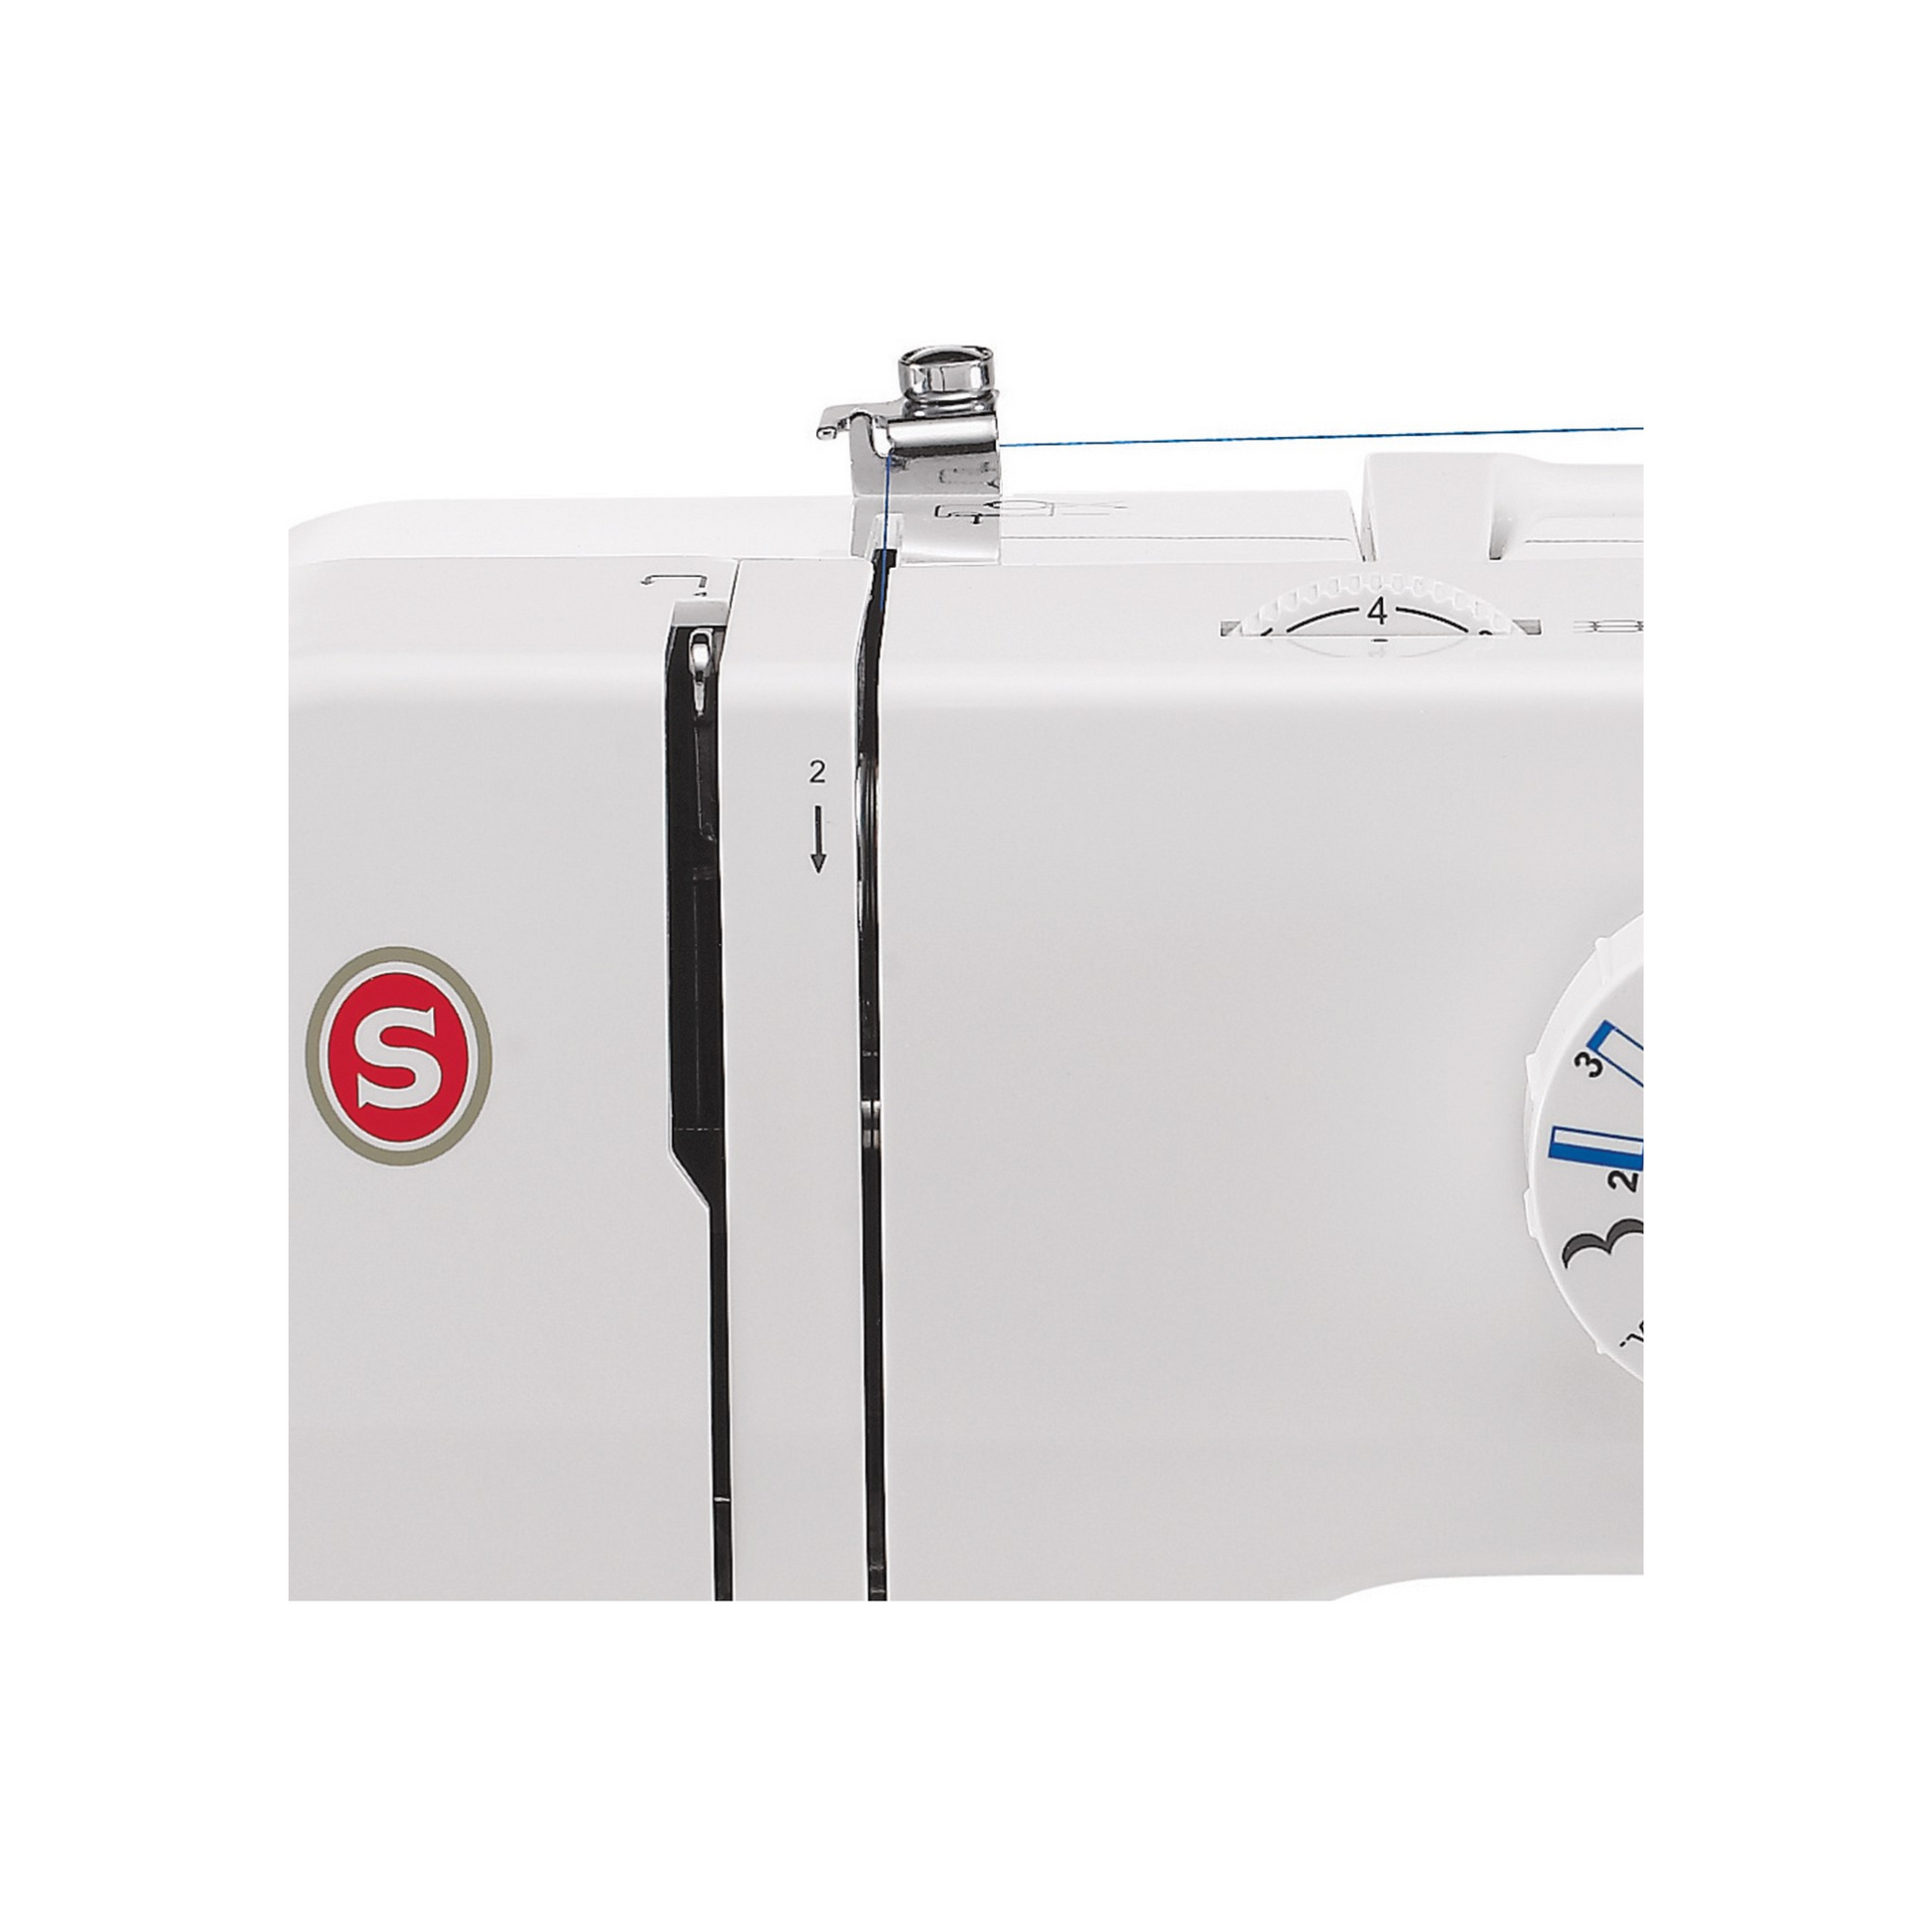 Singer promise 1409 - Sewing machine - White - Close view